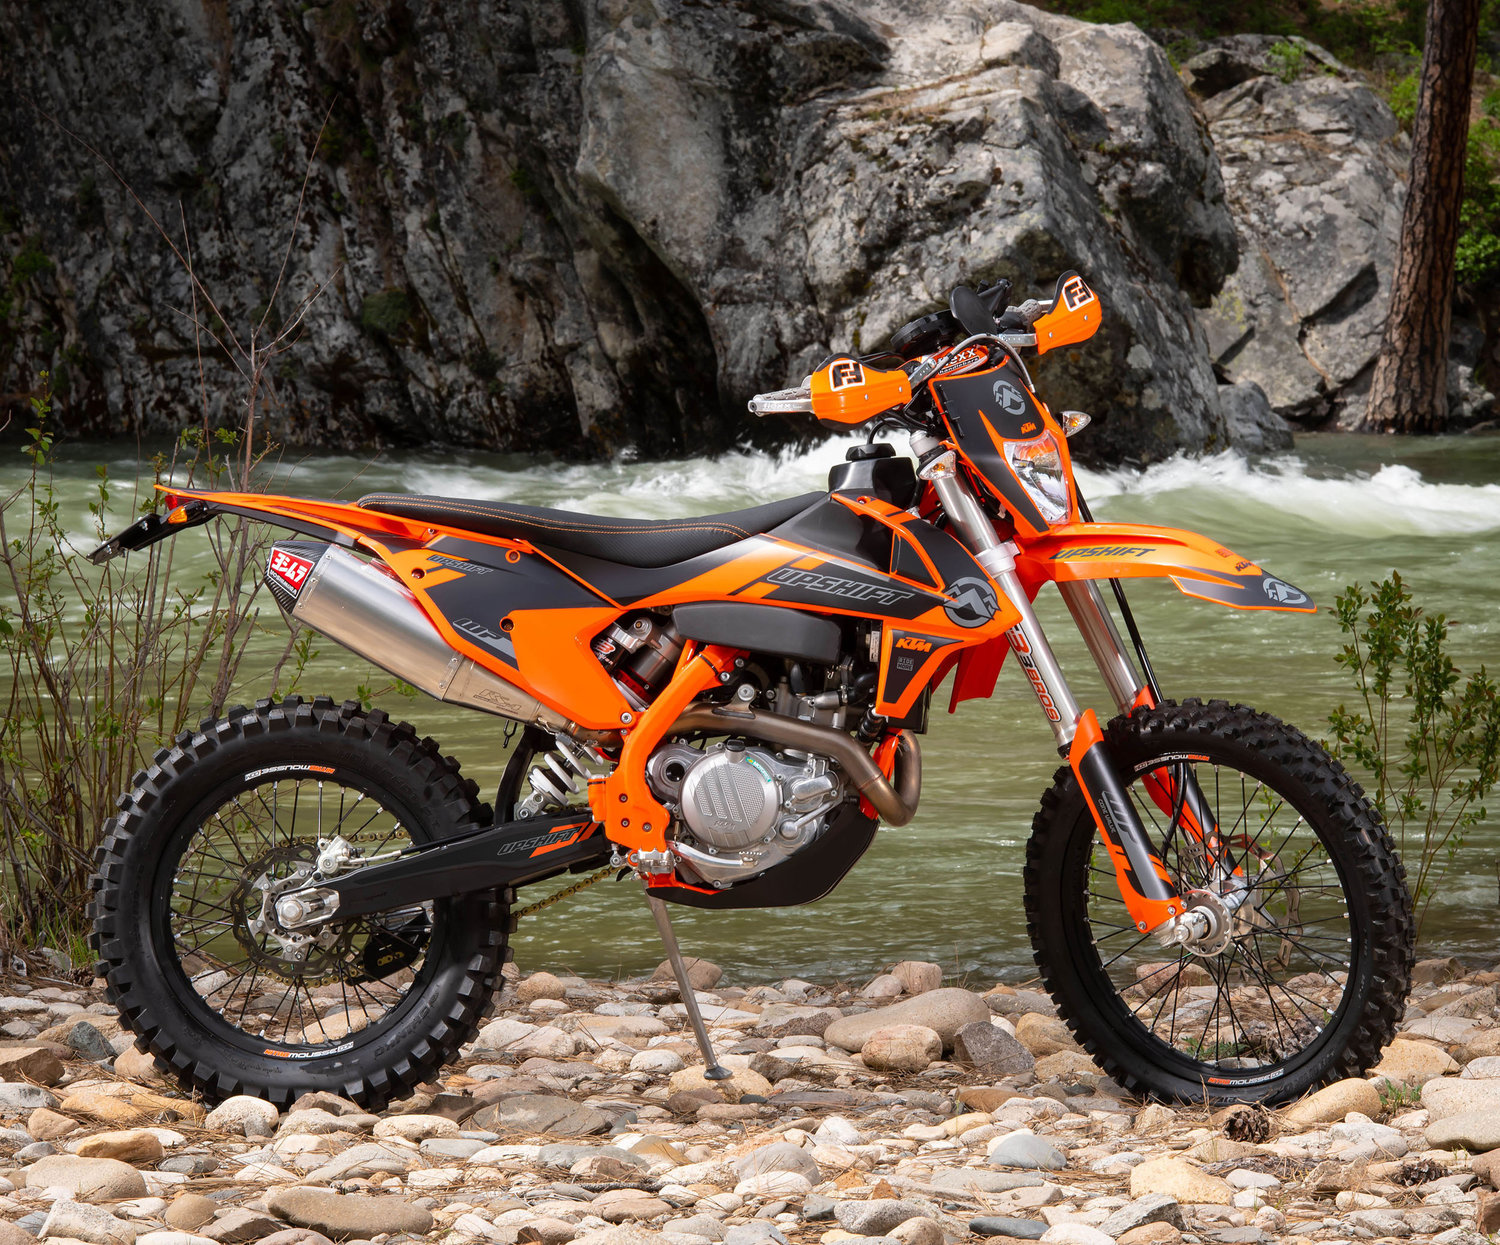 KTM Graphic Kit: What You Need To Know